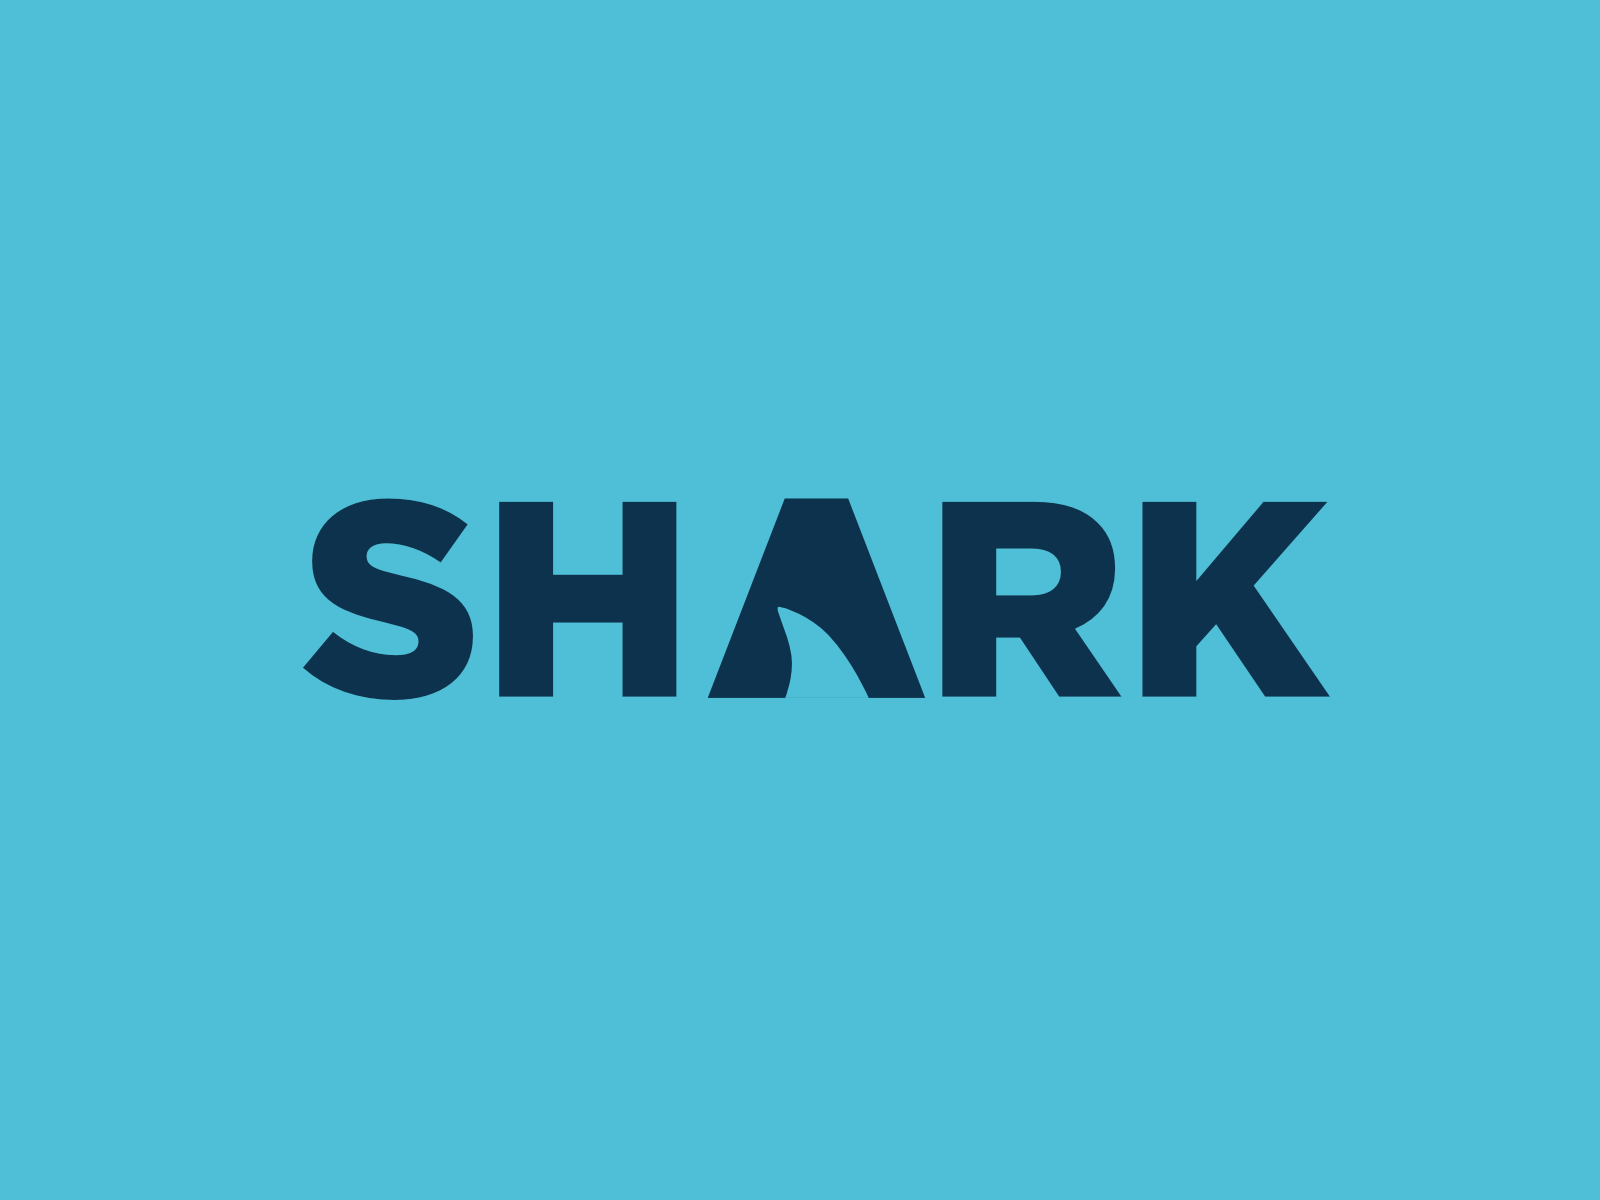 Shark by Charlie on Dribbble